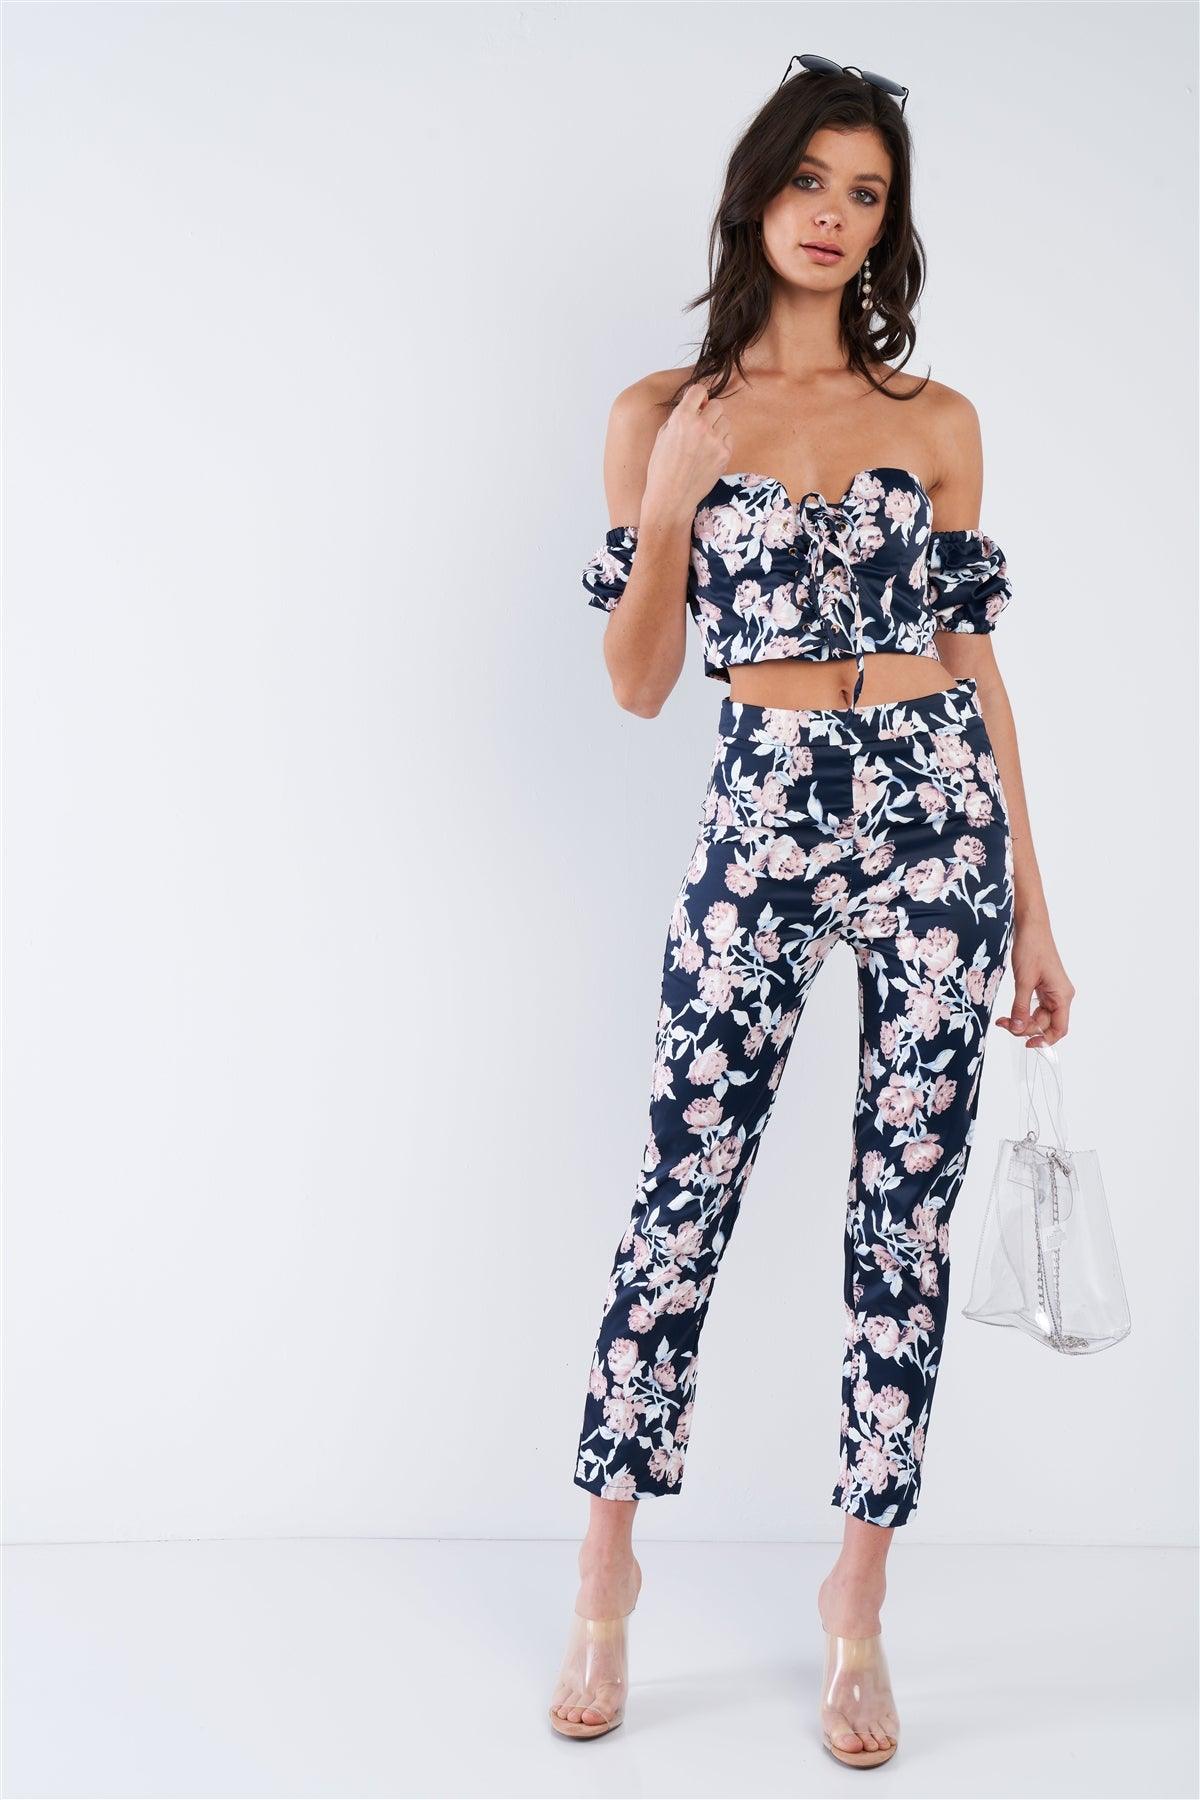 Ensign Blue Mixed Floral Off The Shoulder Lace Up Crop Top & High Waist Ankle Length Pant Set